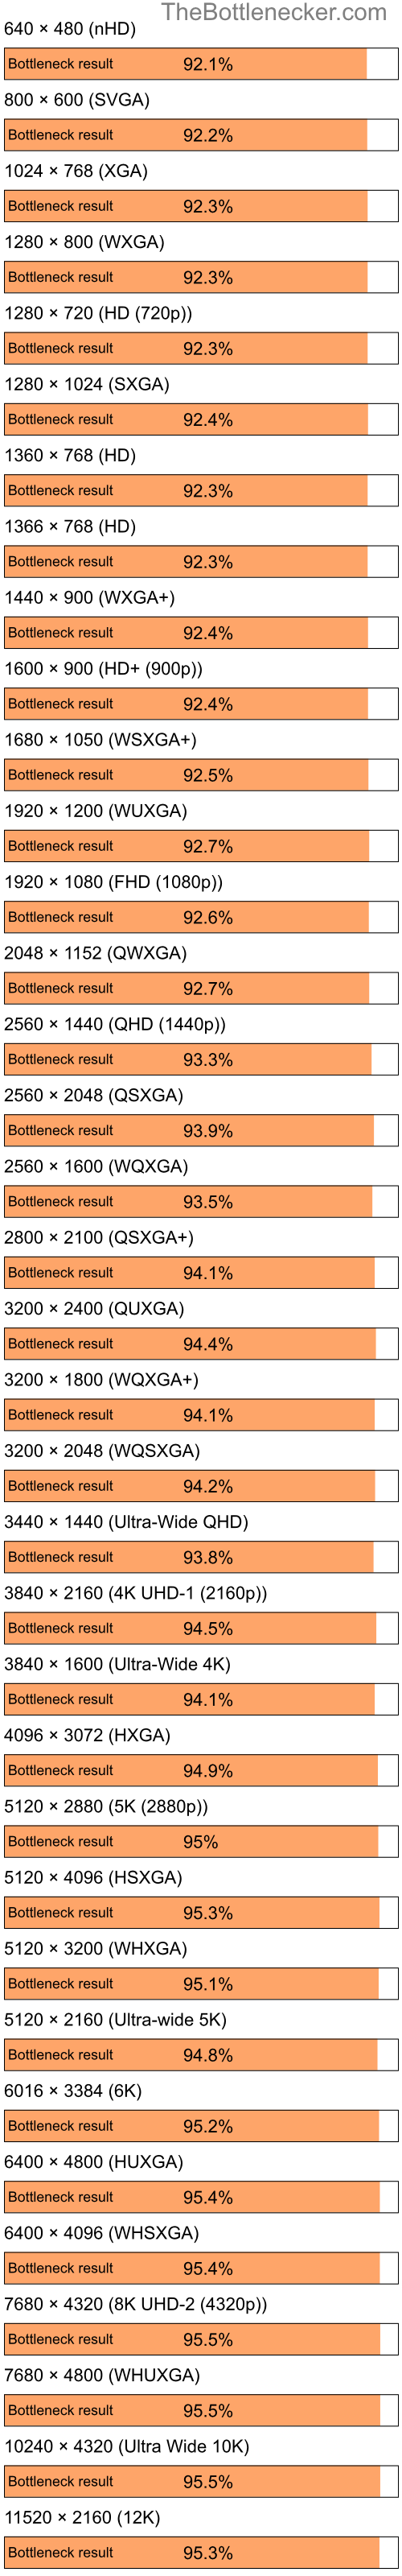 Bottleneck results by resolution for Intel Atom N280 and AMD Radeon 9250 in7 Days to Die